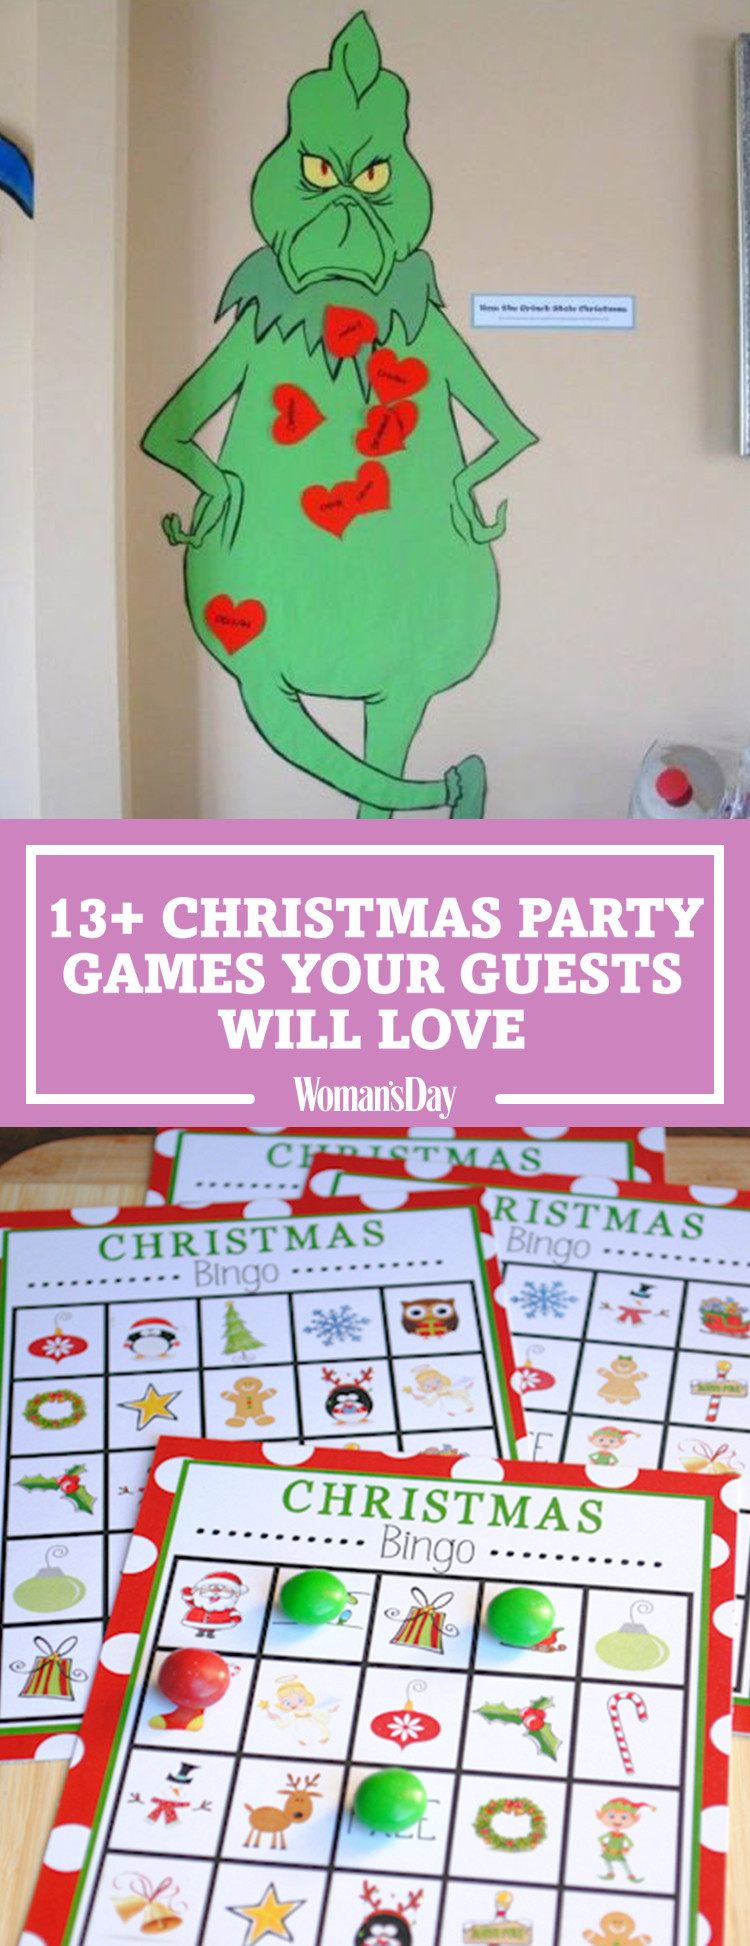 Holiday Party Activity Ideas
 17 Fun Christmas Party Games for Kids DIY Holiday Party